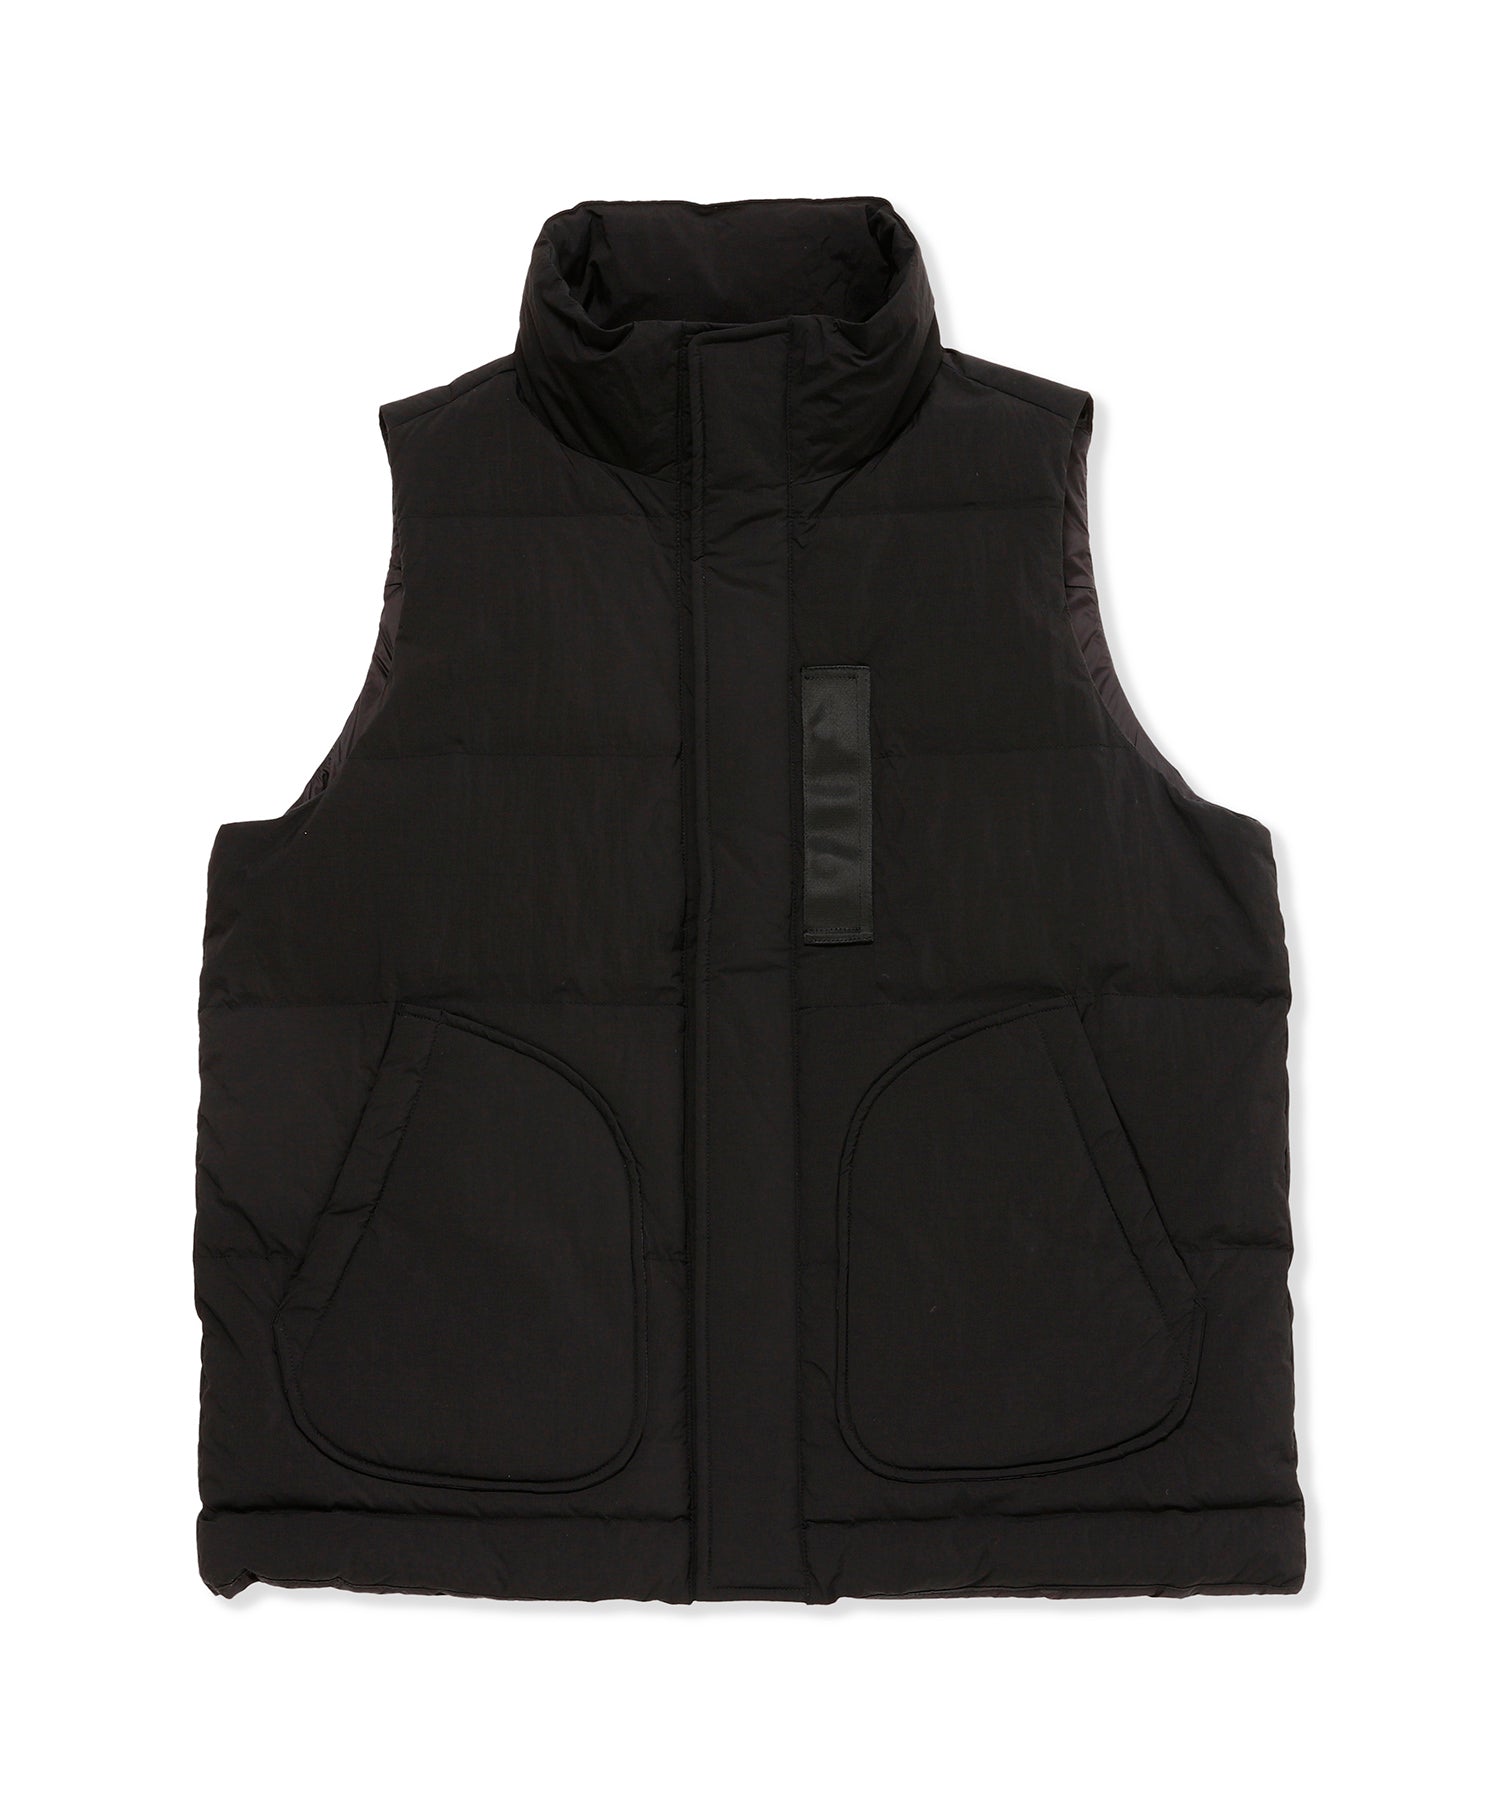 WM×TAION DOWN VEST - White Mountaineering (ホワイトマウンテニア 